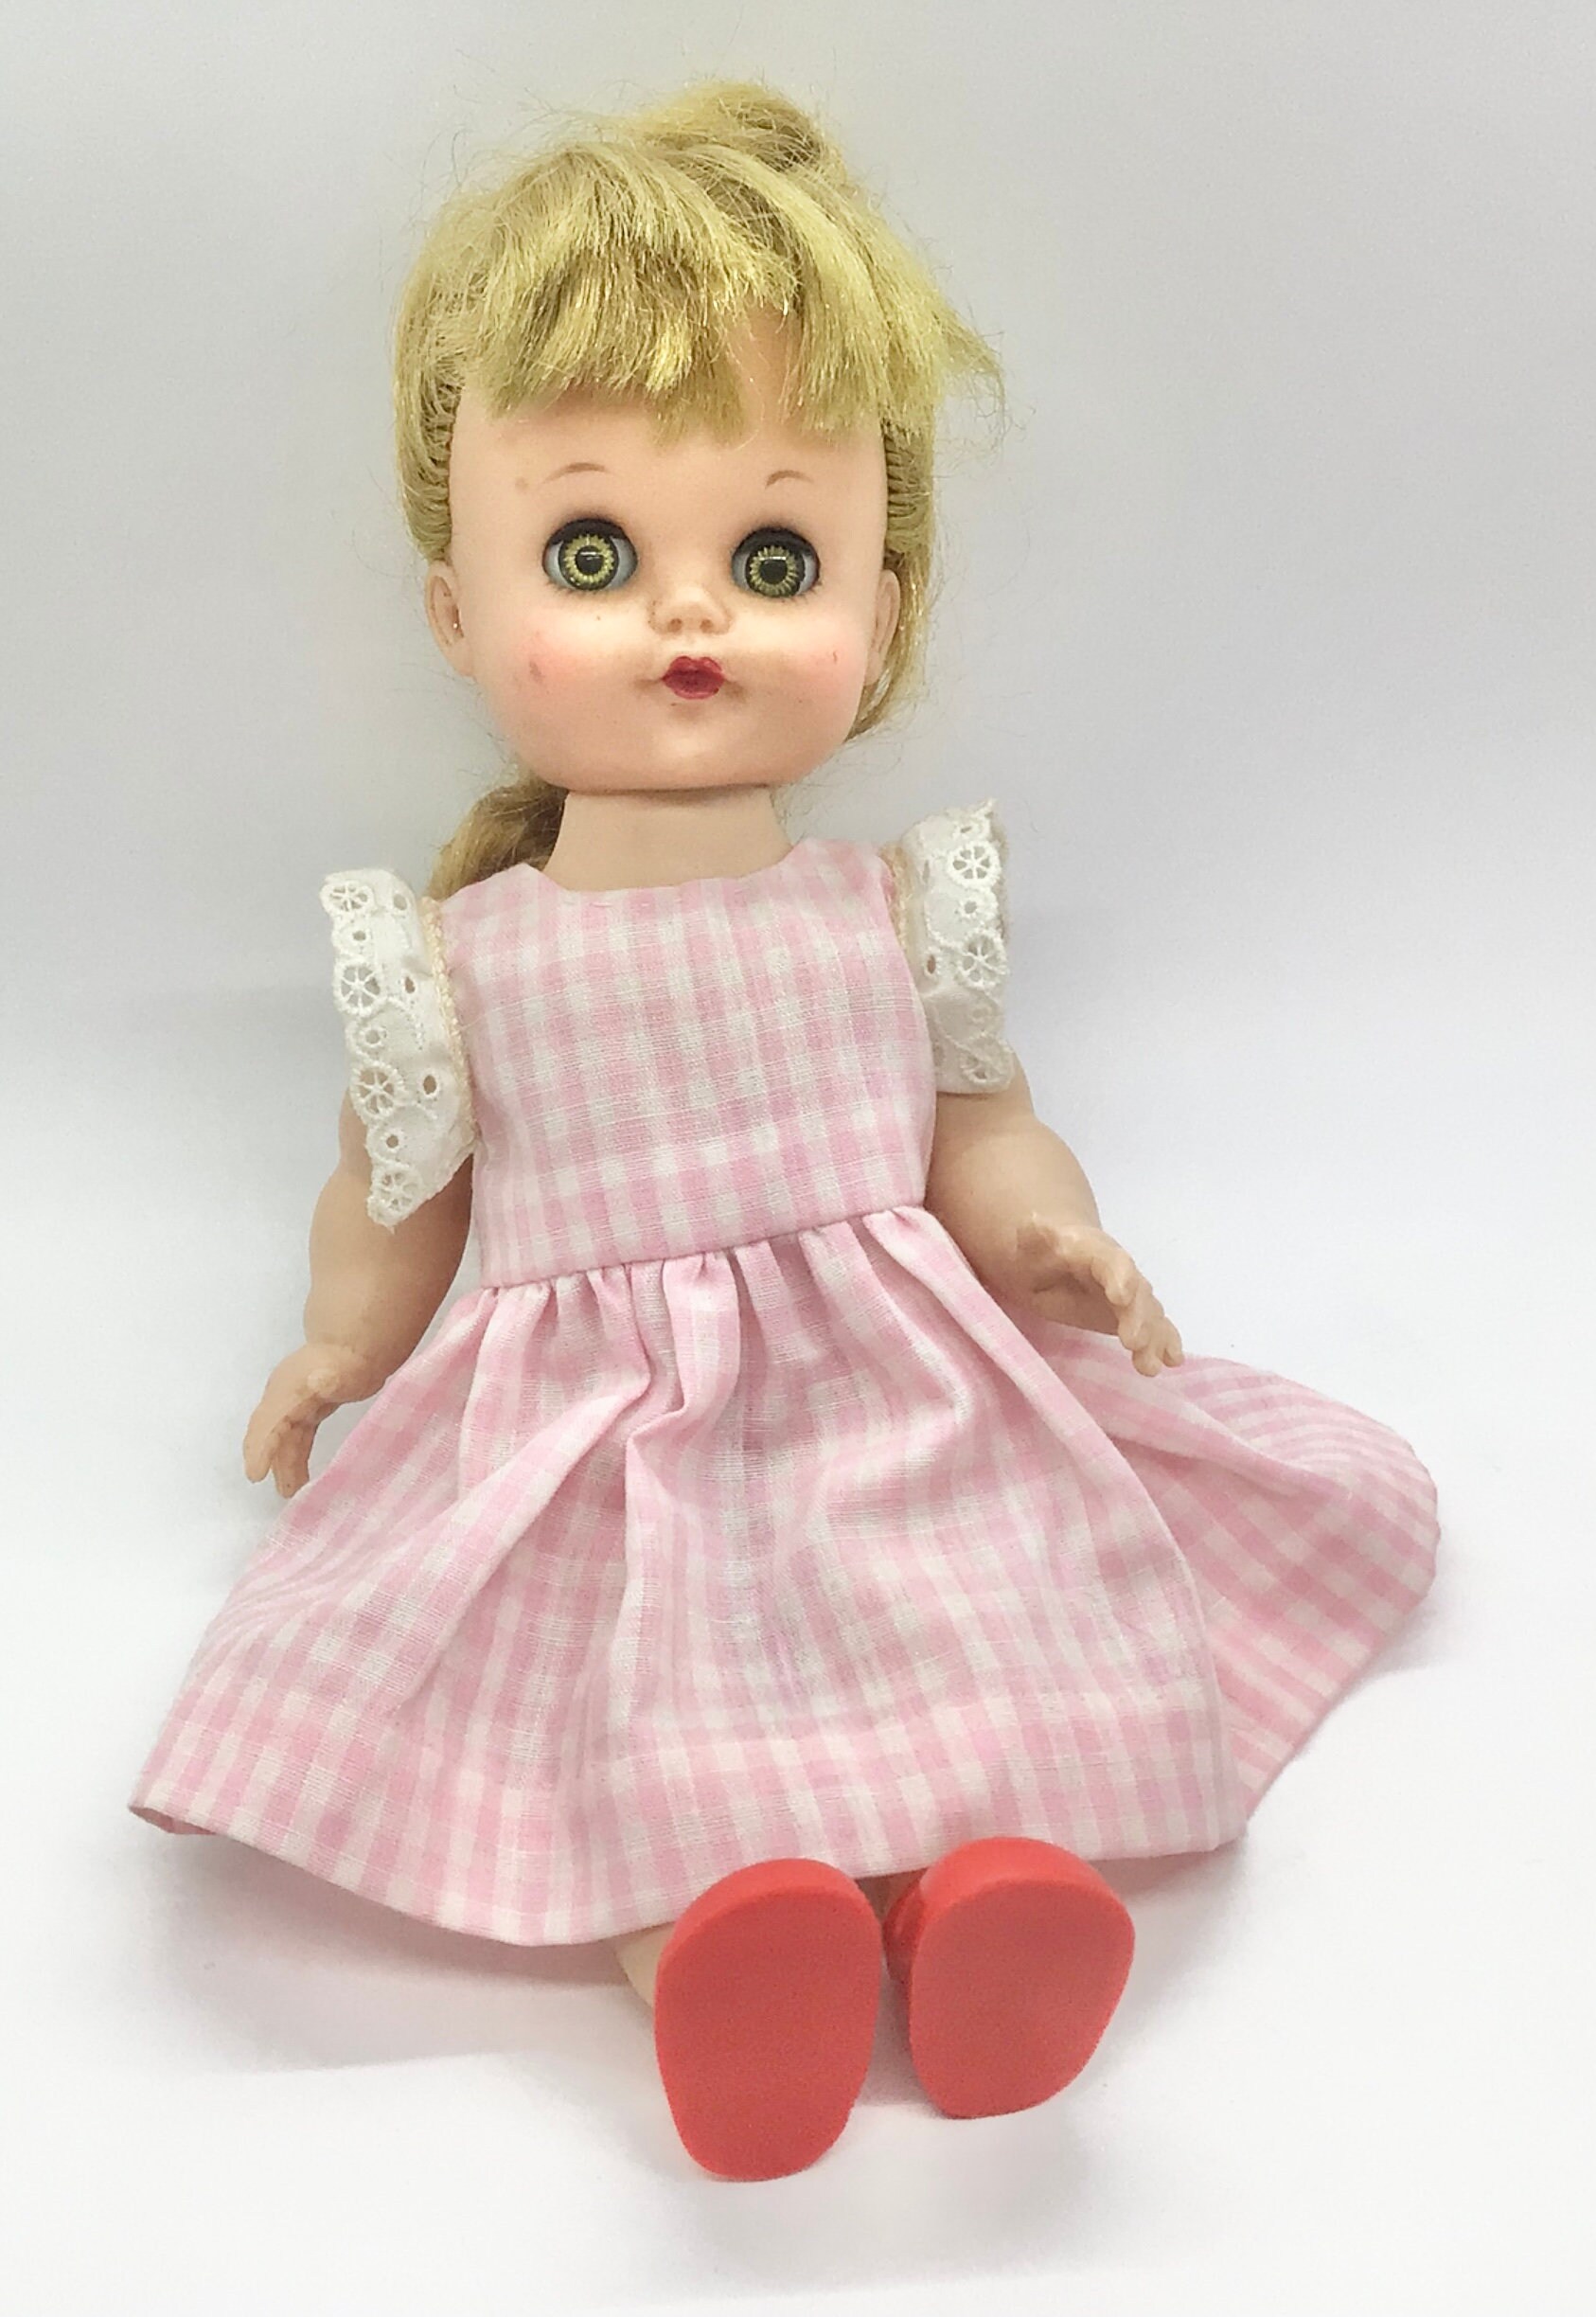 Vintage 1960s Eegee Doll Cute Pink Gingham Dress Red Shoes